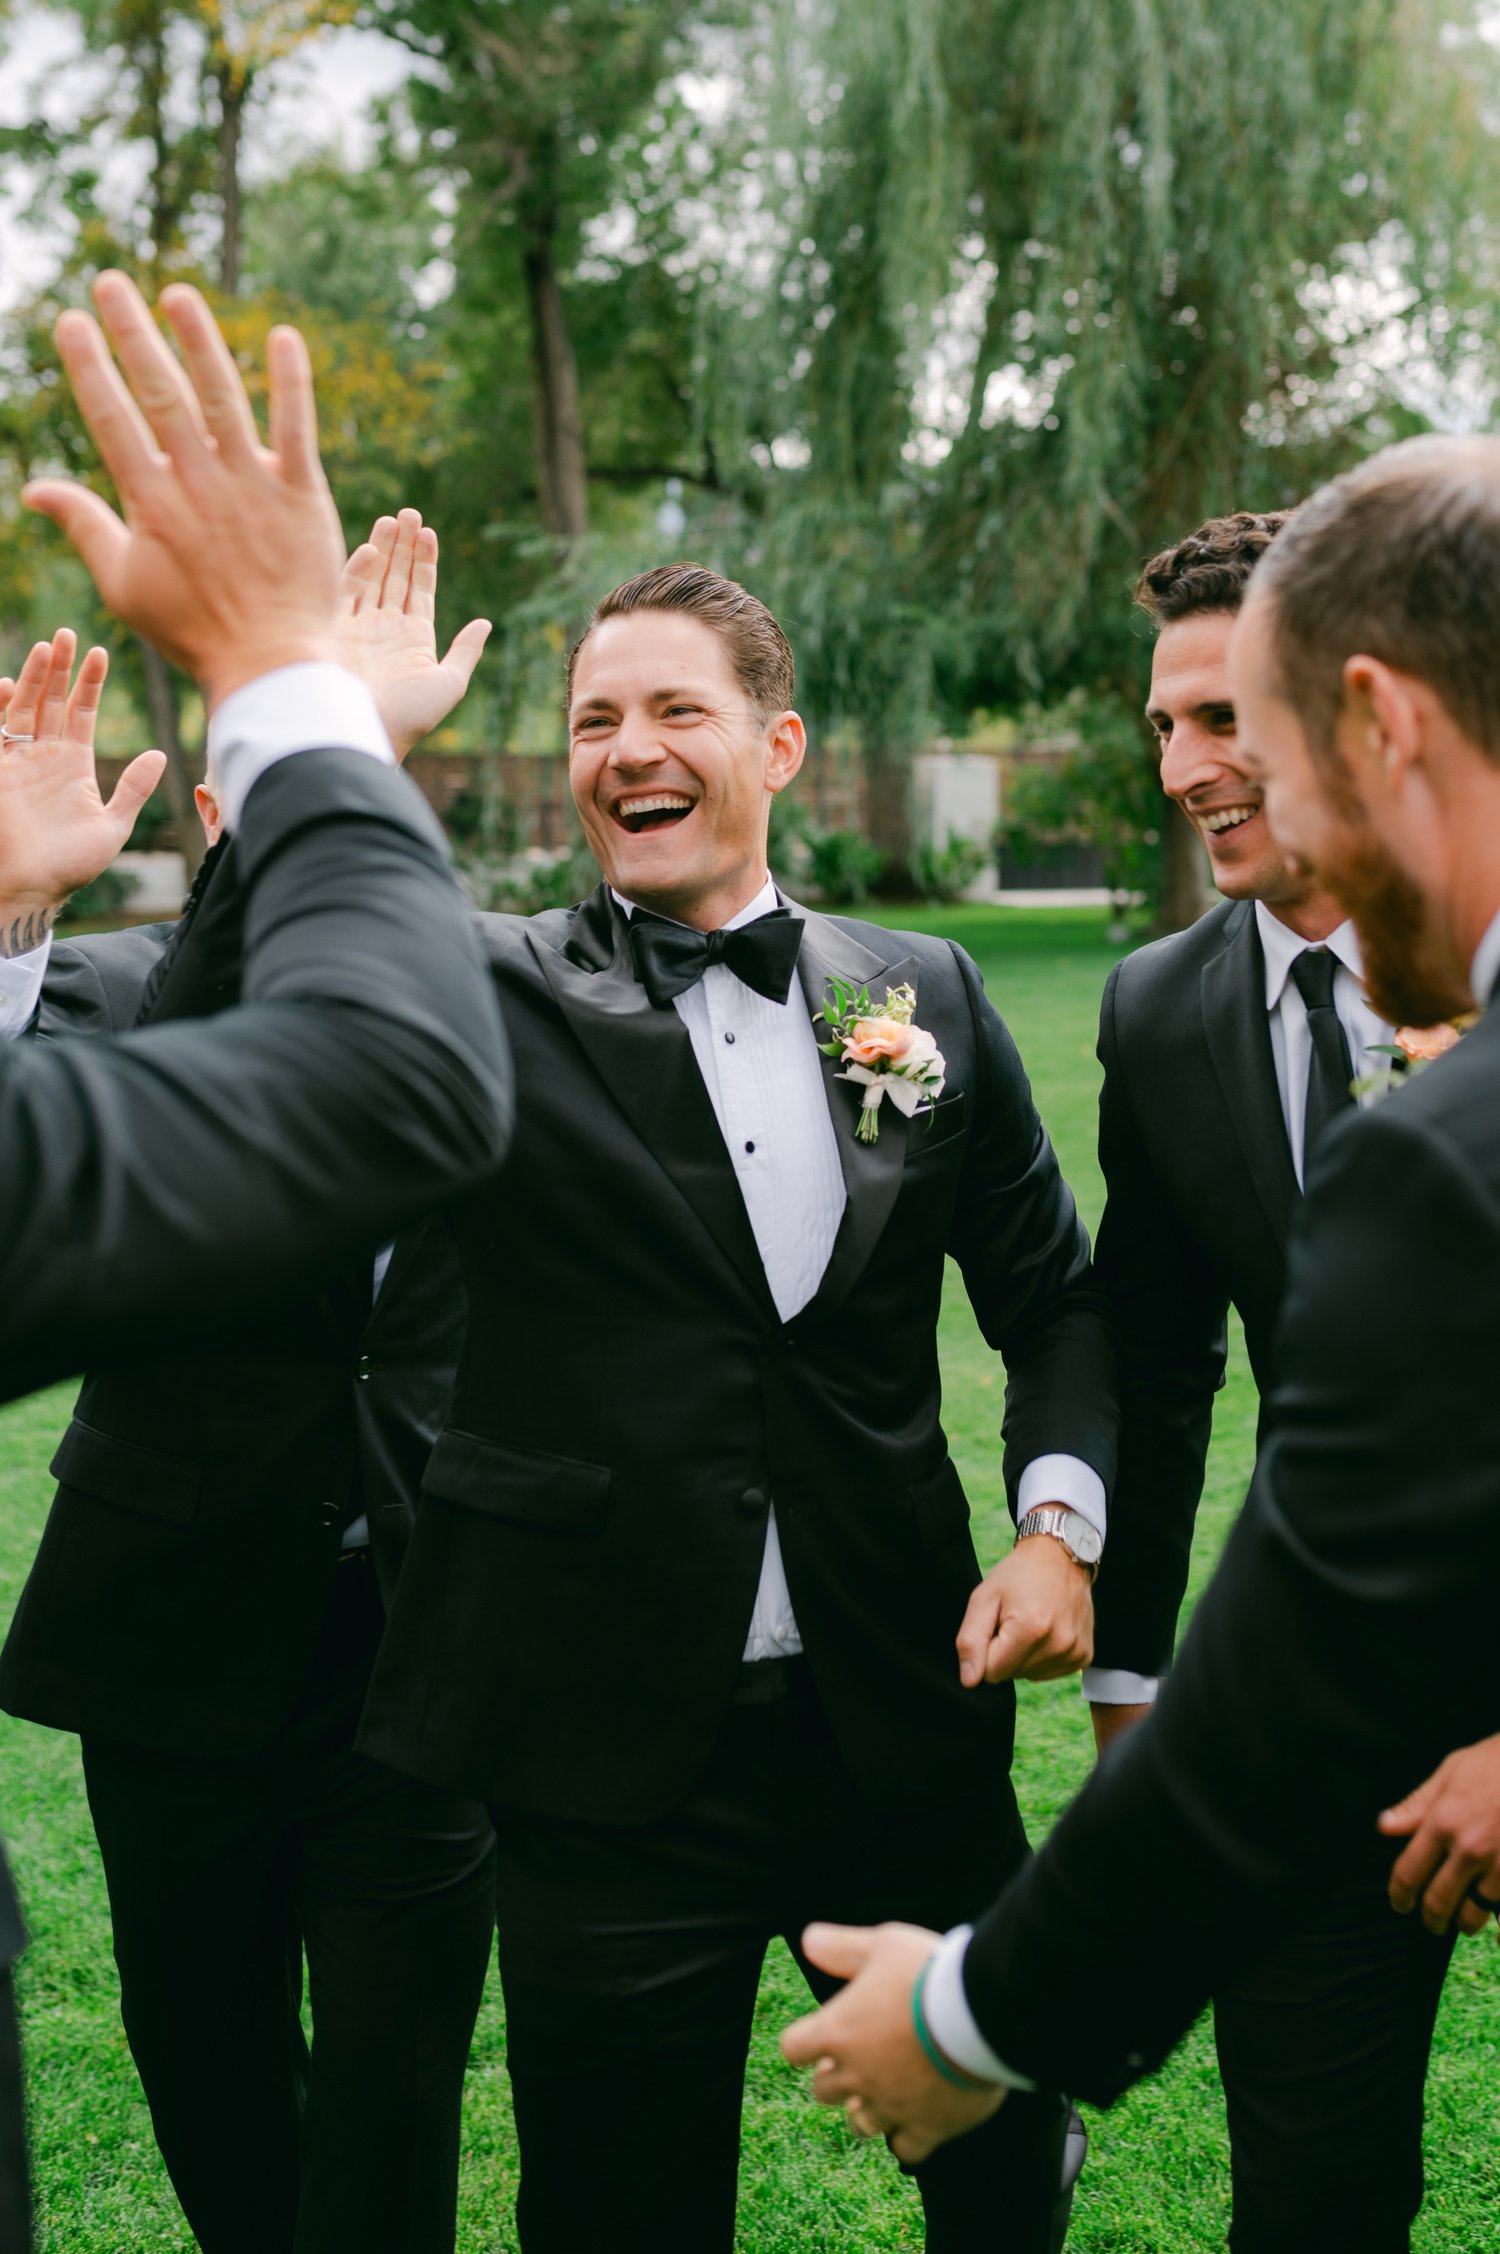 Elm Estate Wedding photos, photo of the groom and groomsmen enjoying each other's company before the ceremony